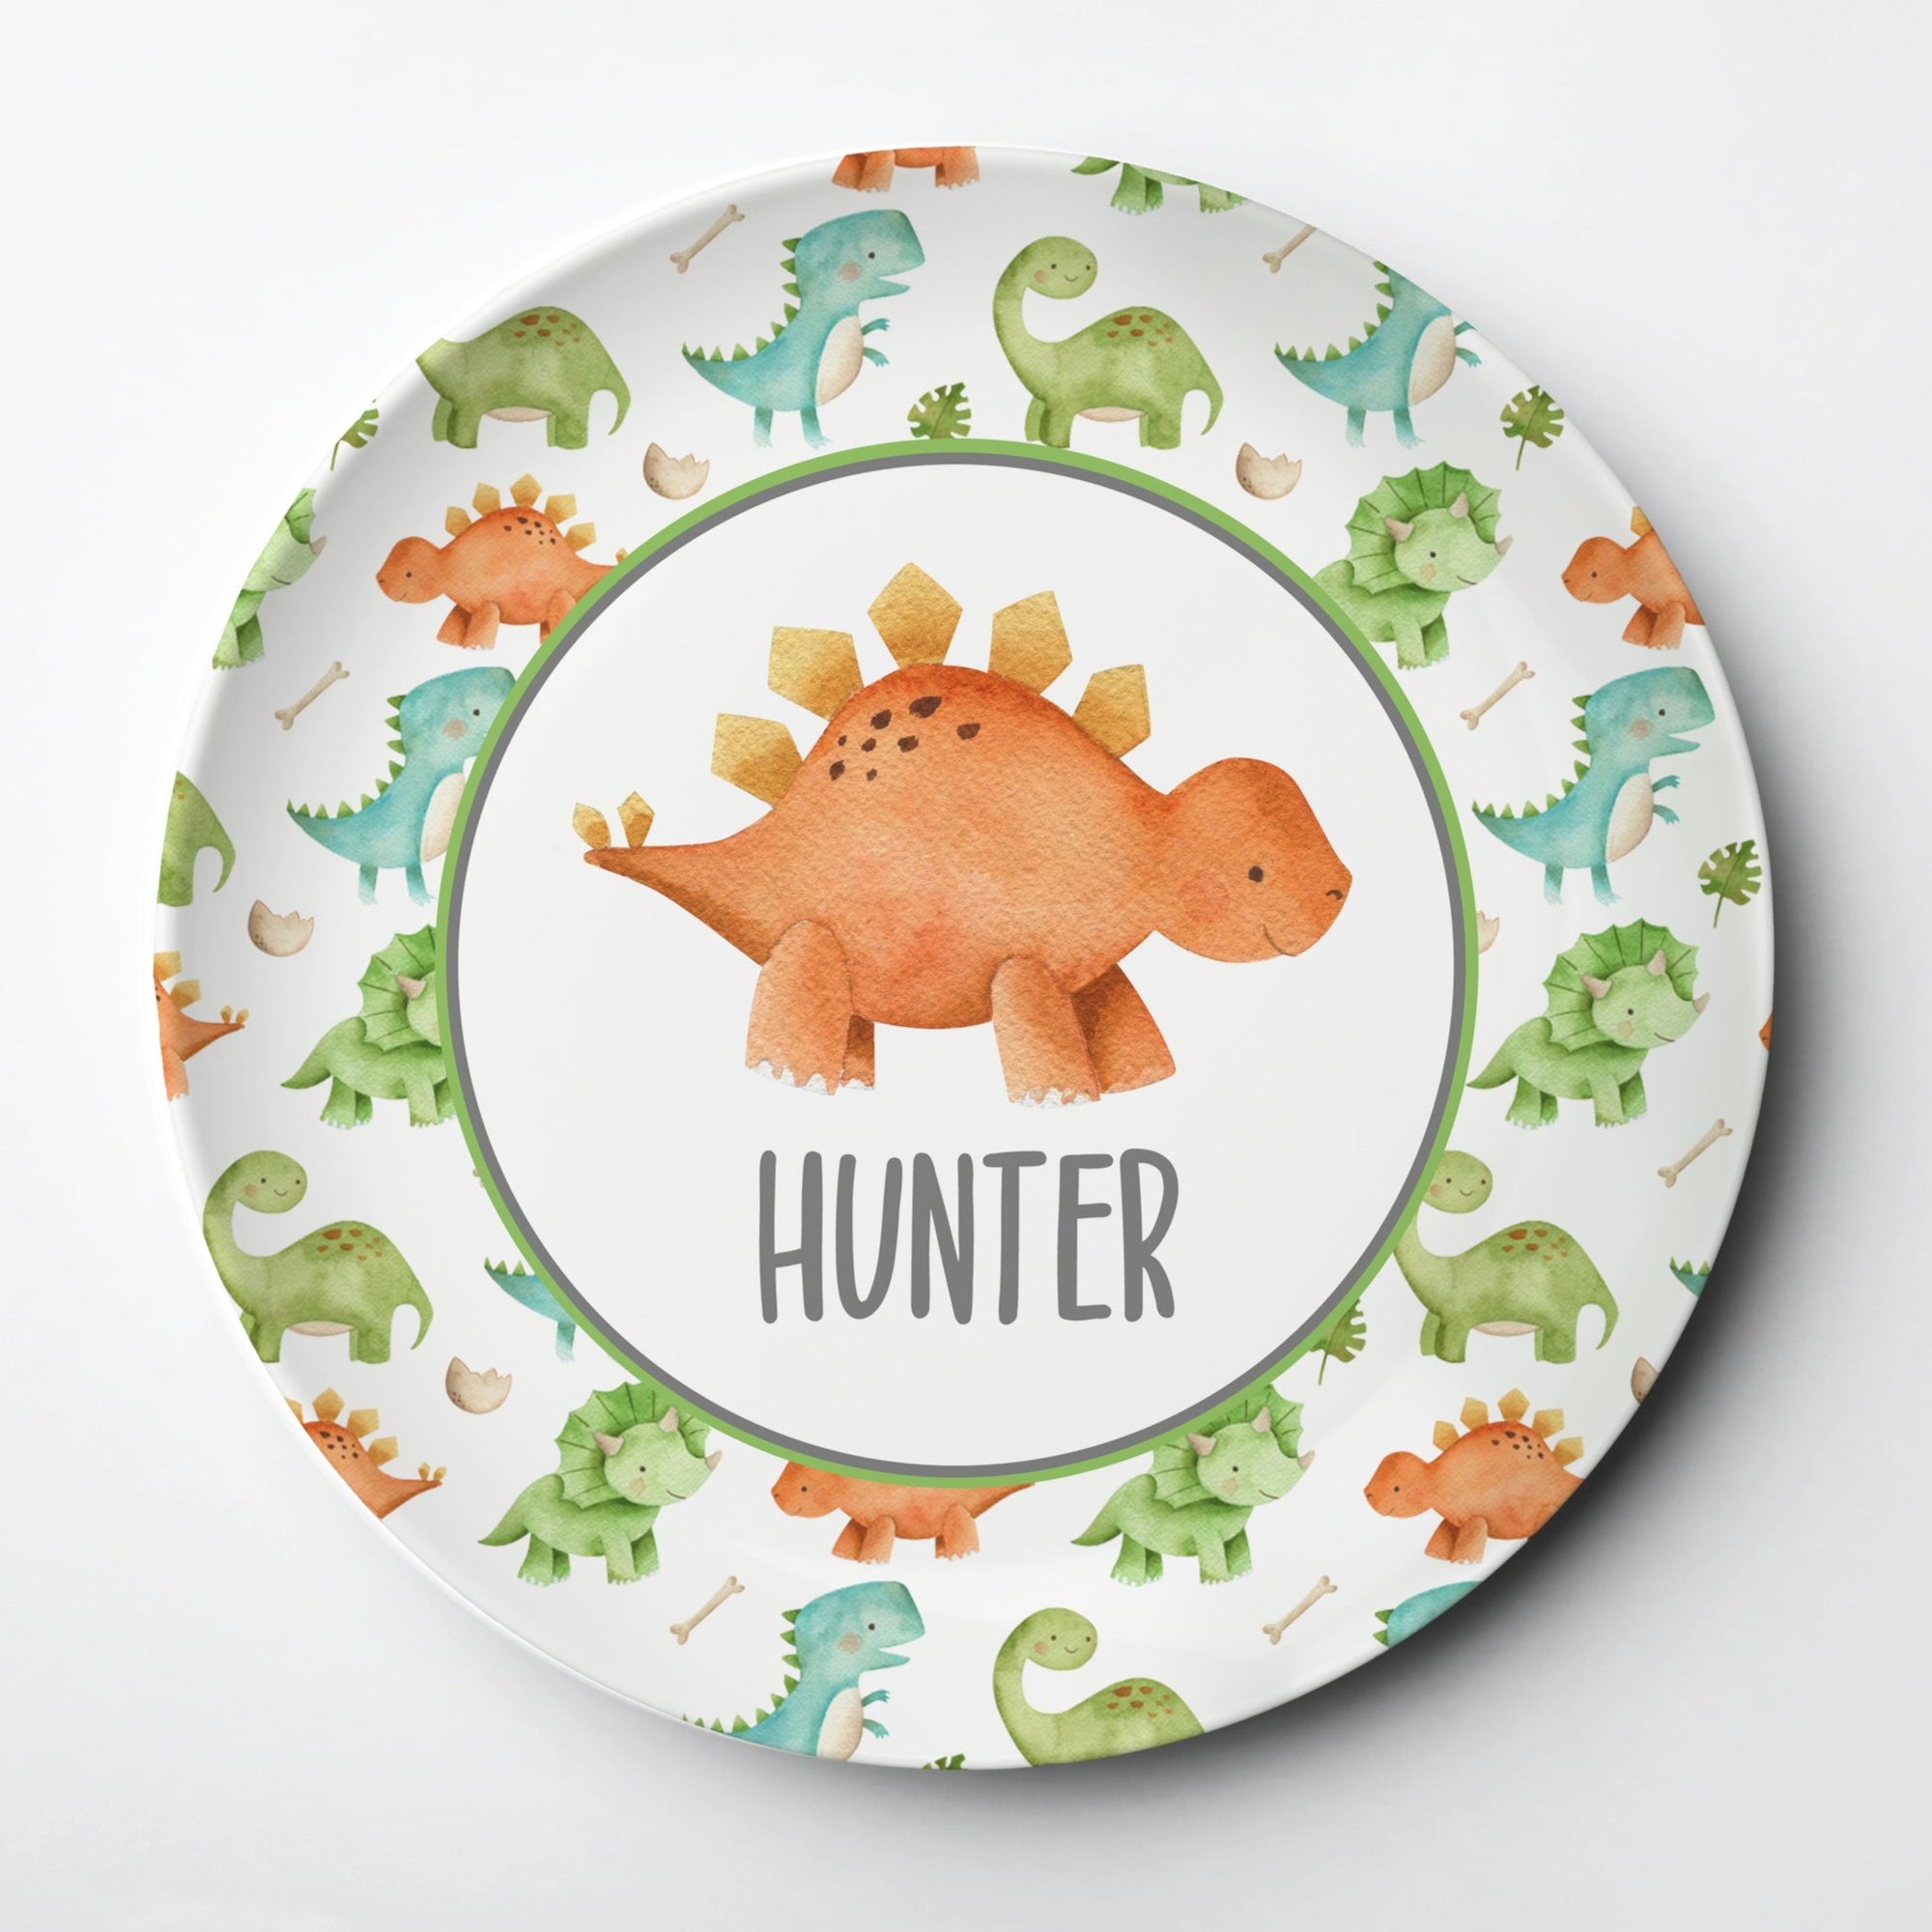 Dinosaur personalized kid plate Stegosaurus - 10" diameter, made from ThermoSāf® · Microwave, oven and dishwasher safe (any rack) · BPA, melamine and formaldehyde free · FDA food safe & made in the USA, Pipsy.com